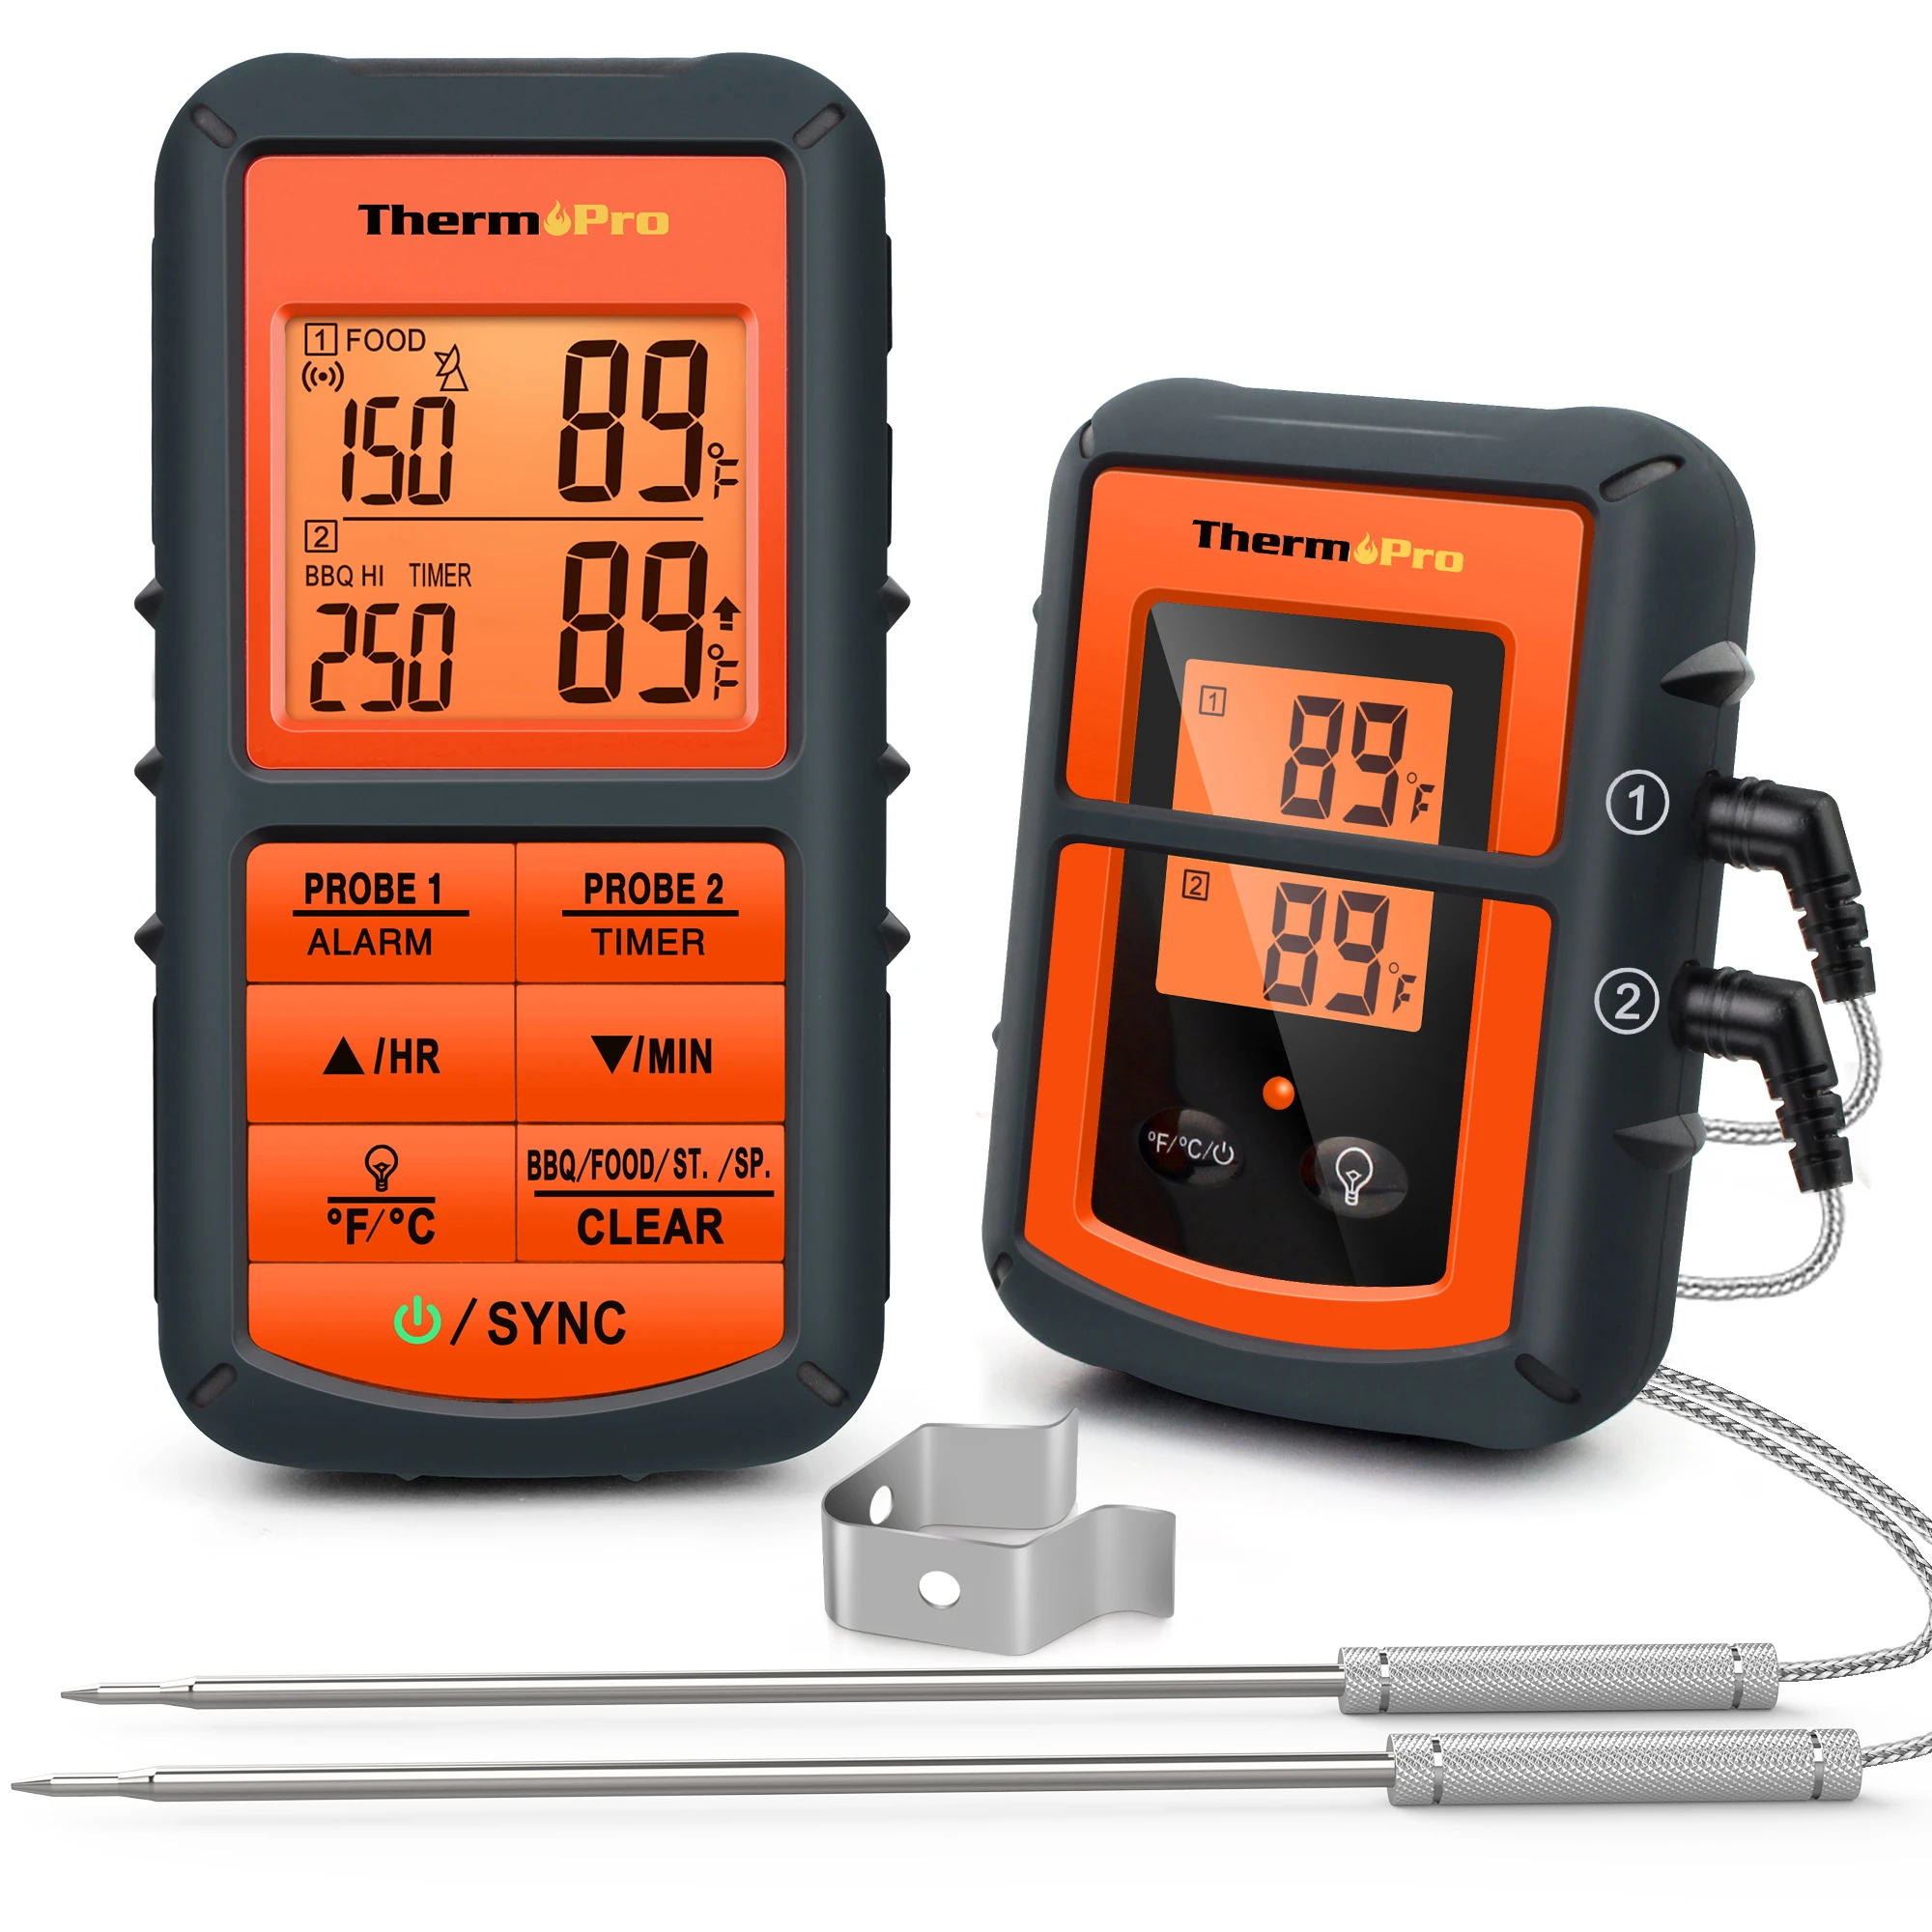 ThermoPro TP-08C 150M Remote Wireless Food Kitchen Thermometer Dual Probe For BBQ, Smoker, Grill, Oven, Meat With Timer